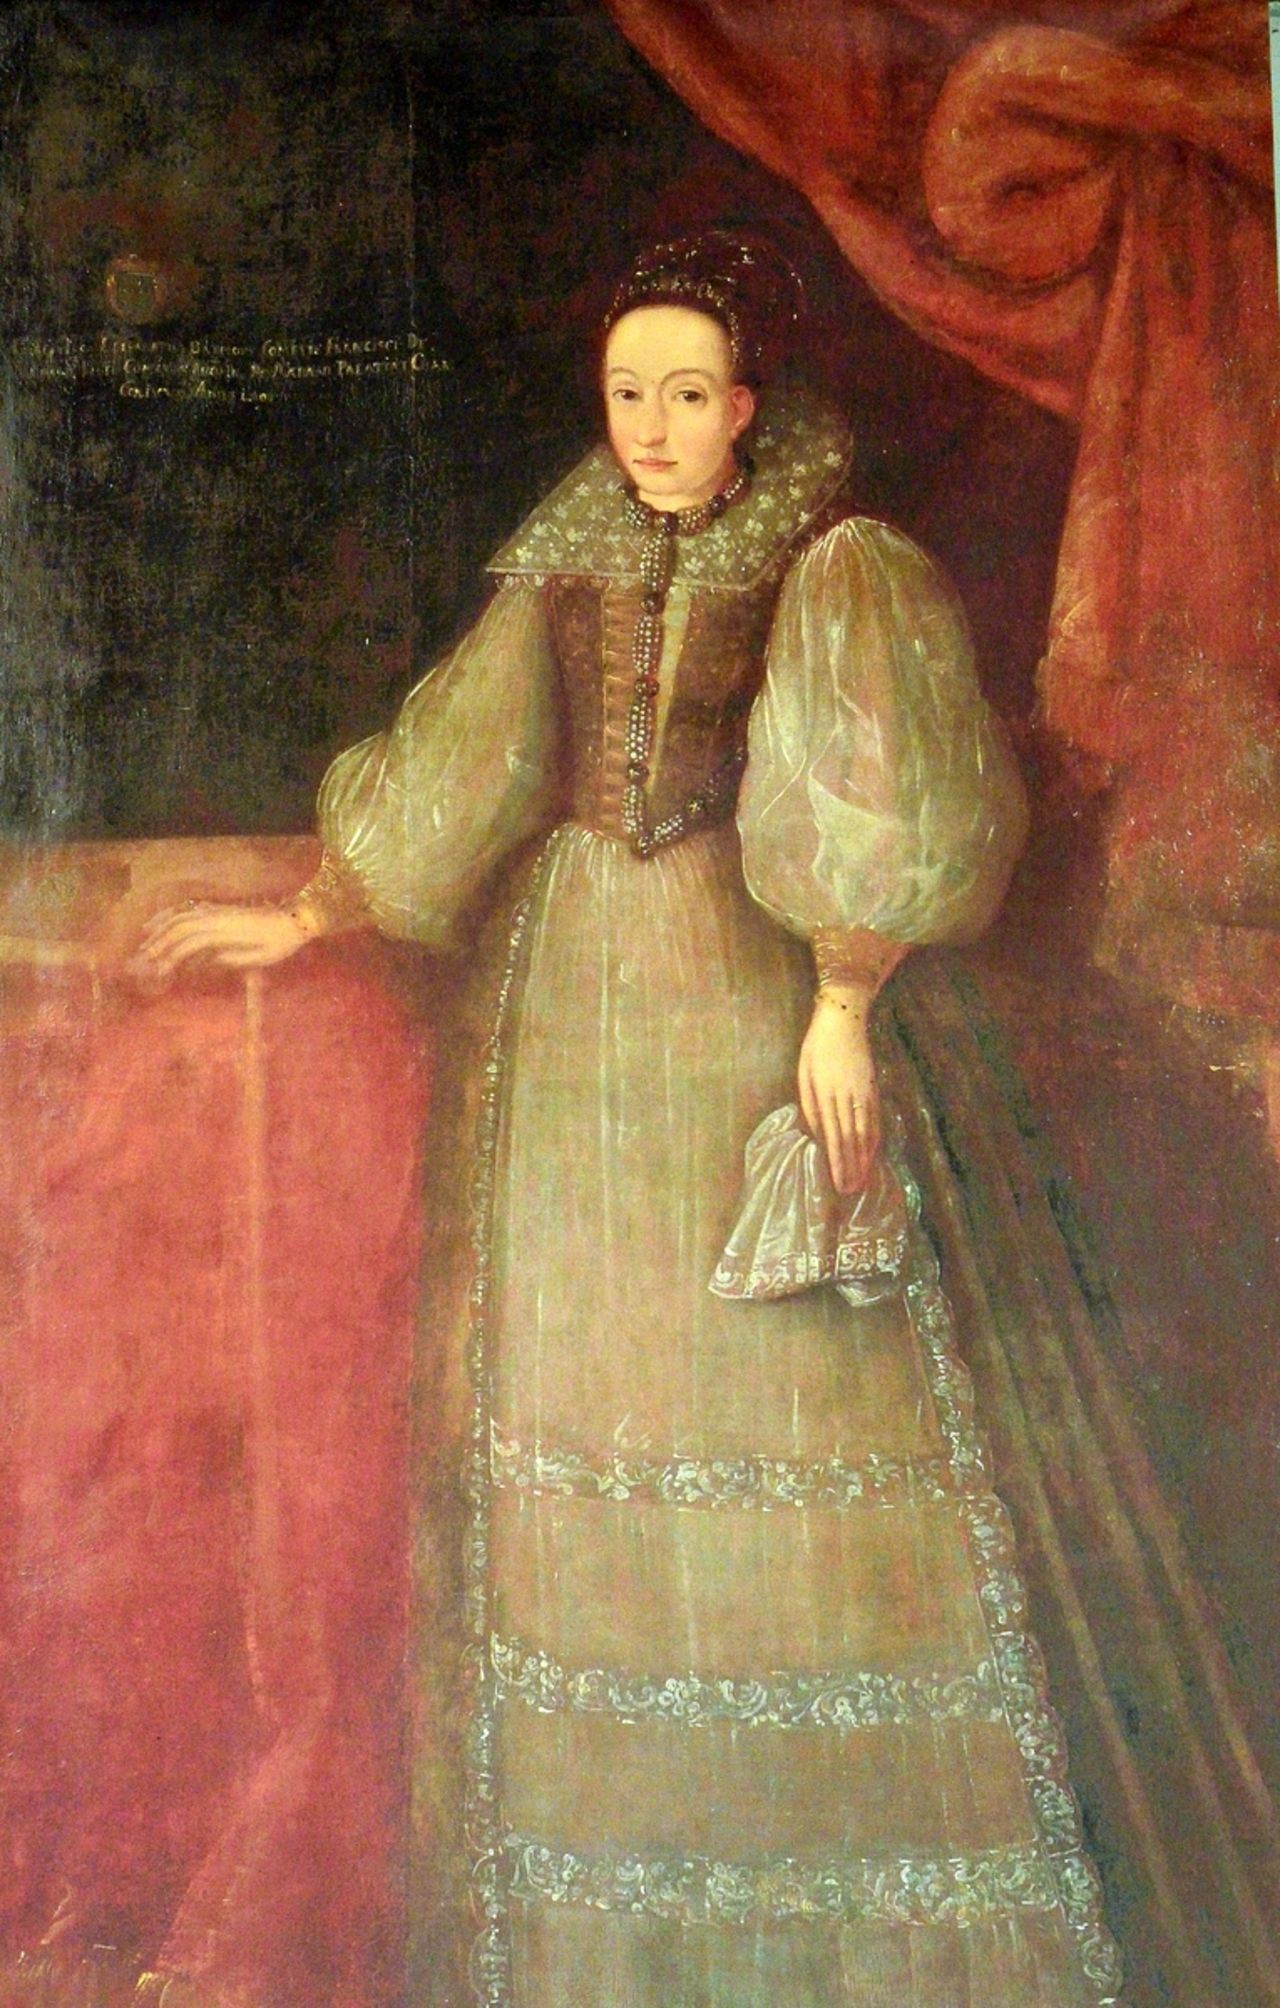 Highborn and unaccountable, Elizabeth Bathory was the absolute ruler of a patch of what is now Slovakia. With the help of three of her servants, she sadistically tortured between 100 and 650 girls to death.